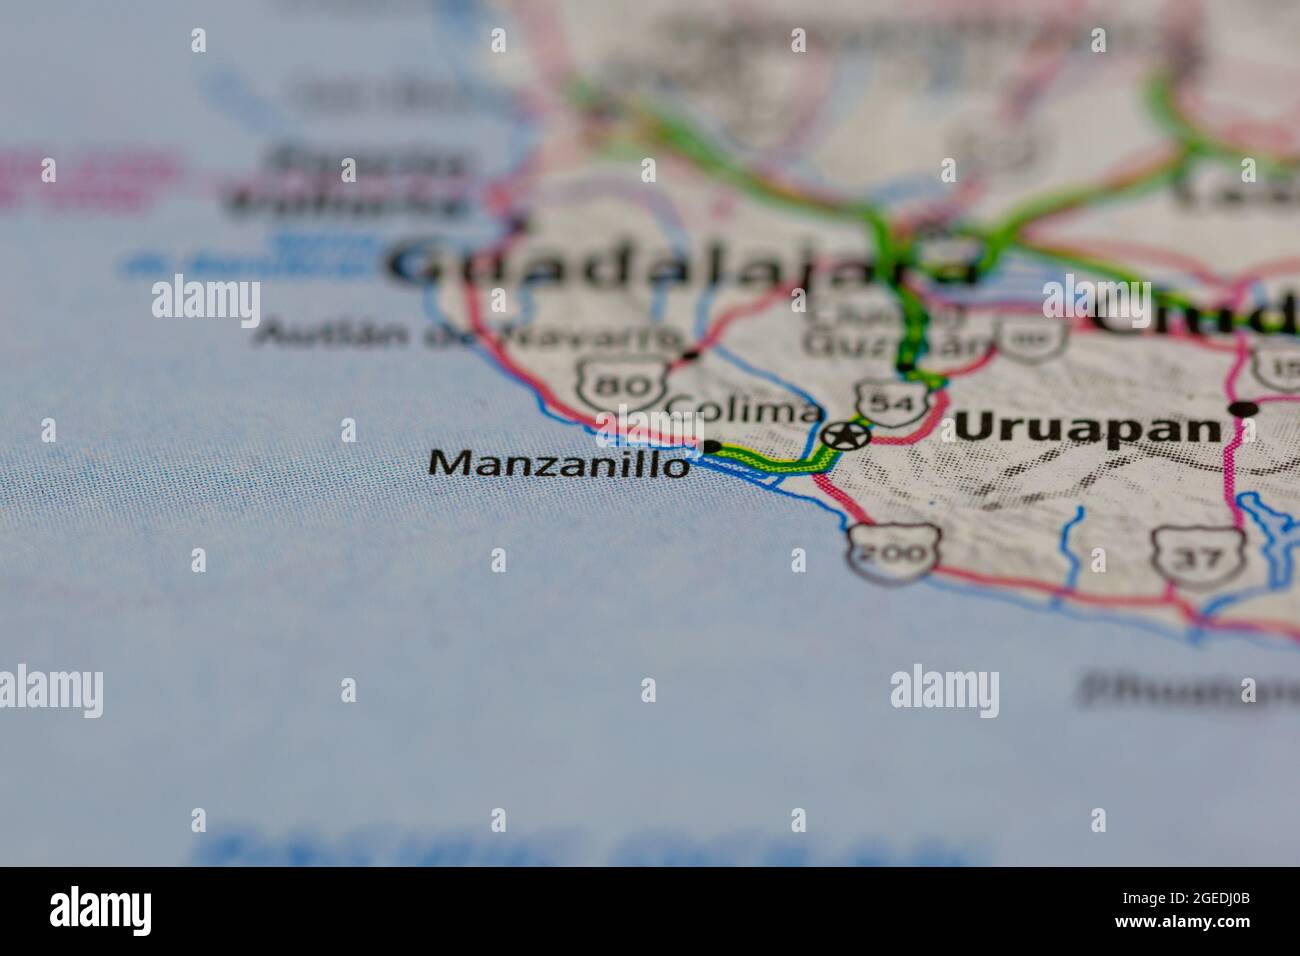 Manzanillo Mexico shown on a road map or Geography map Stock Photo